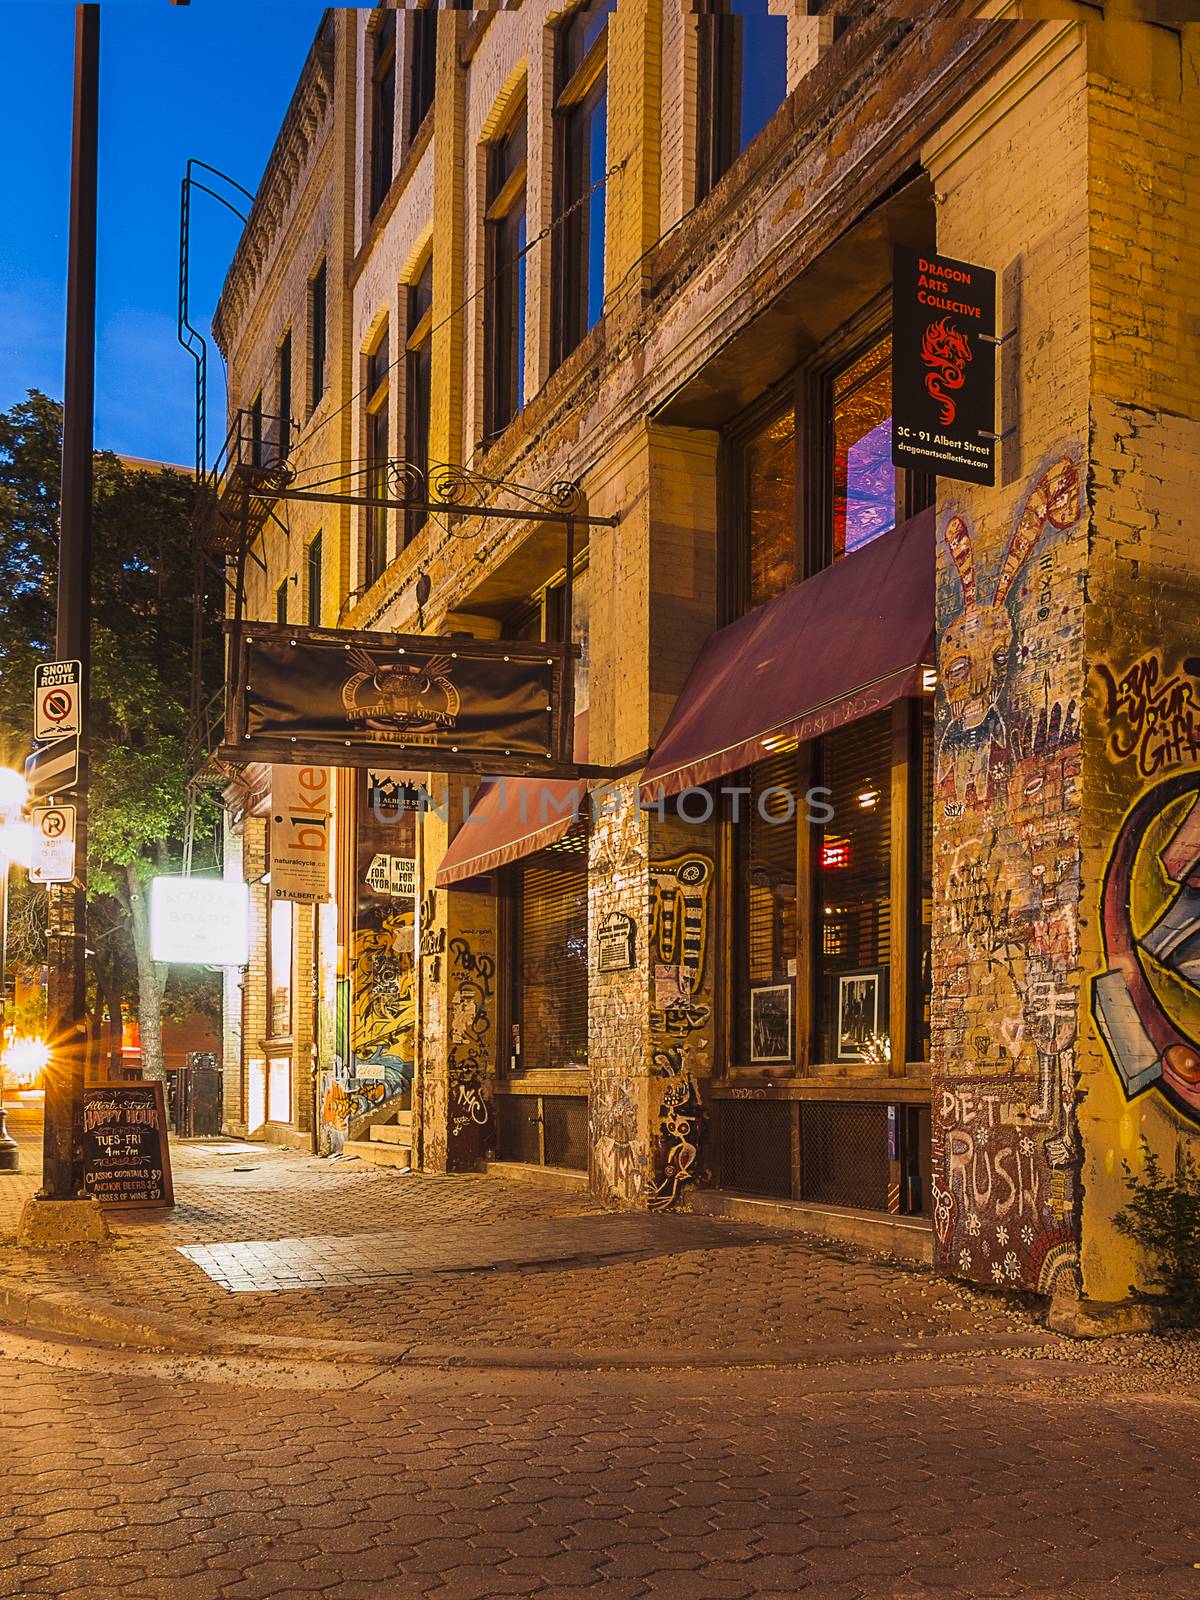 Winnipeg. Evening street. Old building with graffiti on the walls. Frame vertical. Canada.